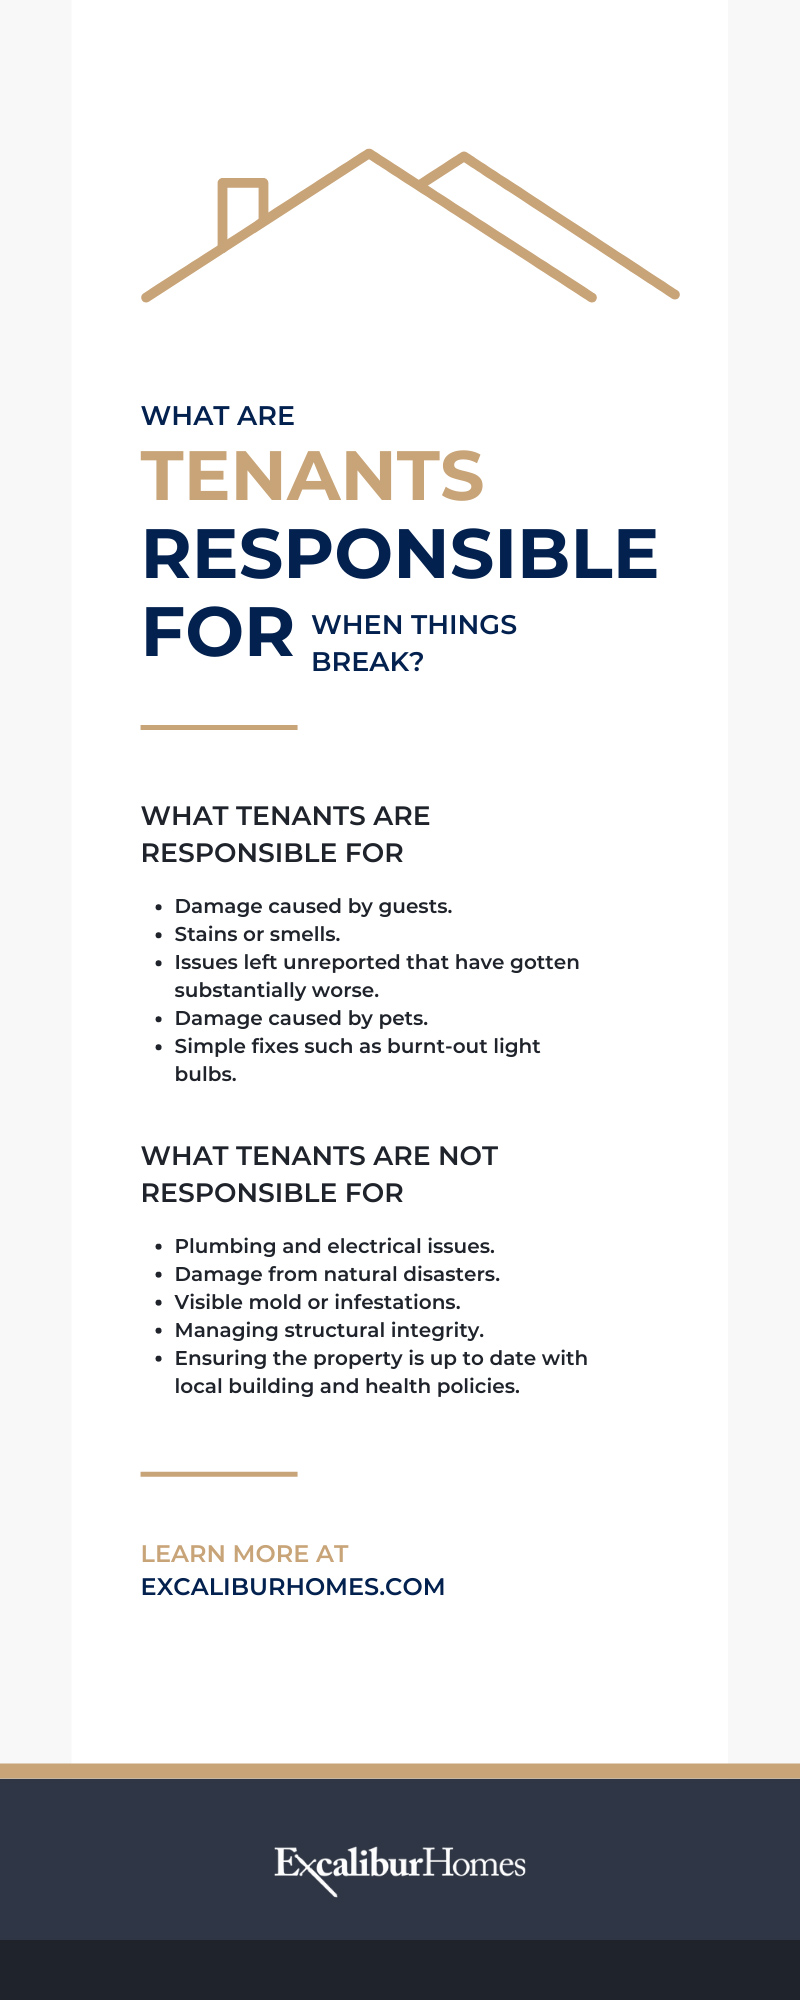 What Are Tenants Responsible for When Things Break?
